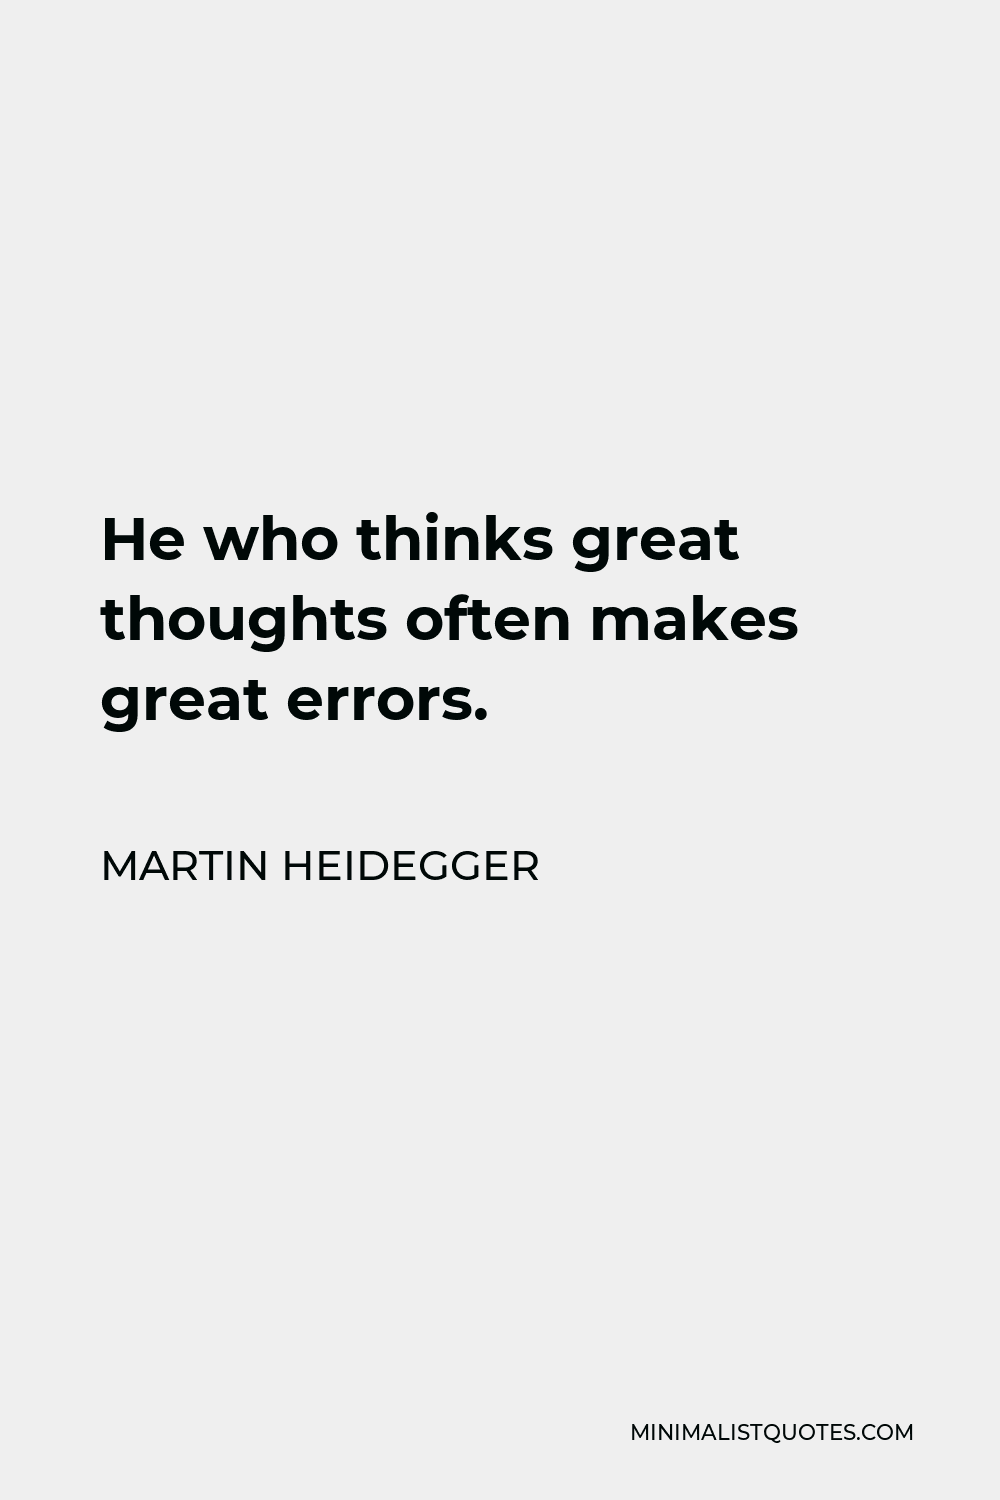 Martin Heidegger Quote: He who thinks great thoughts often makes ...